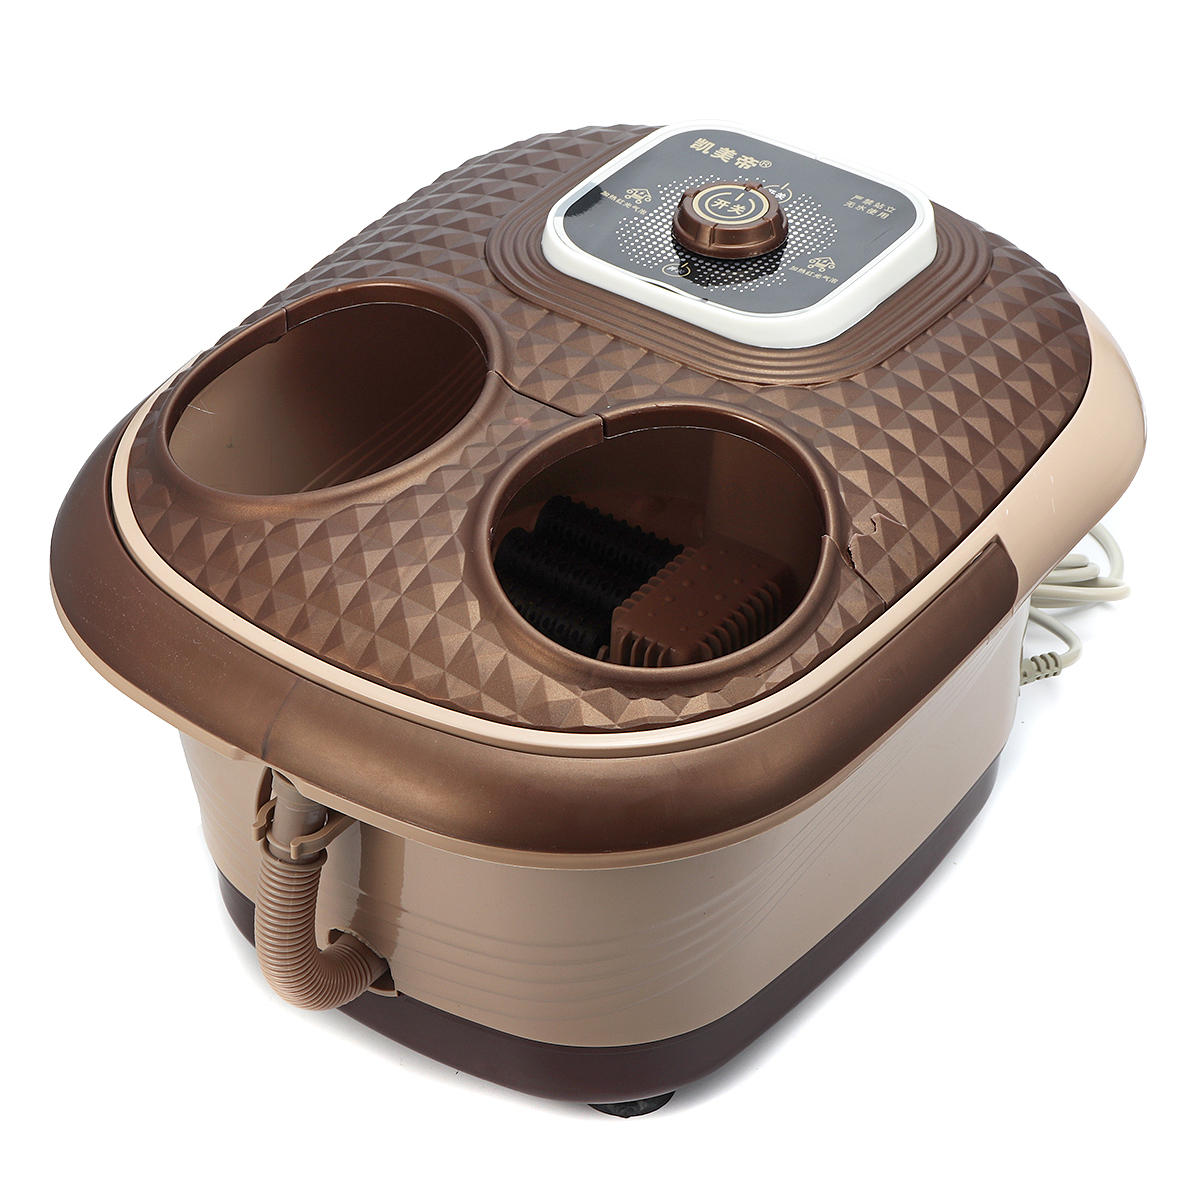 best price,220v,500w,foot,spa,bath,massager,coupon,price,discount